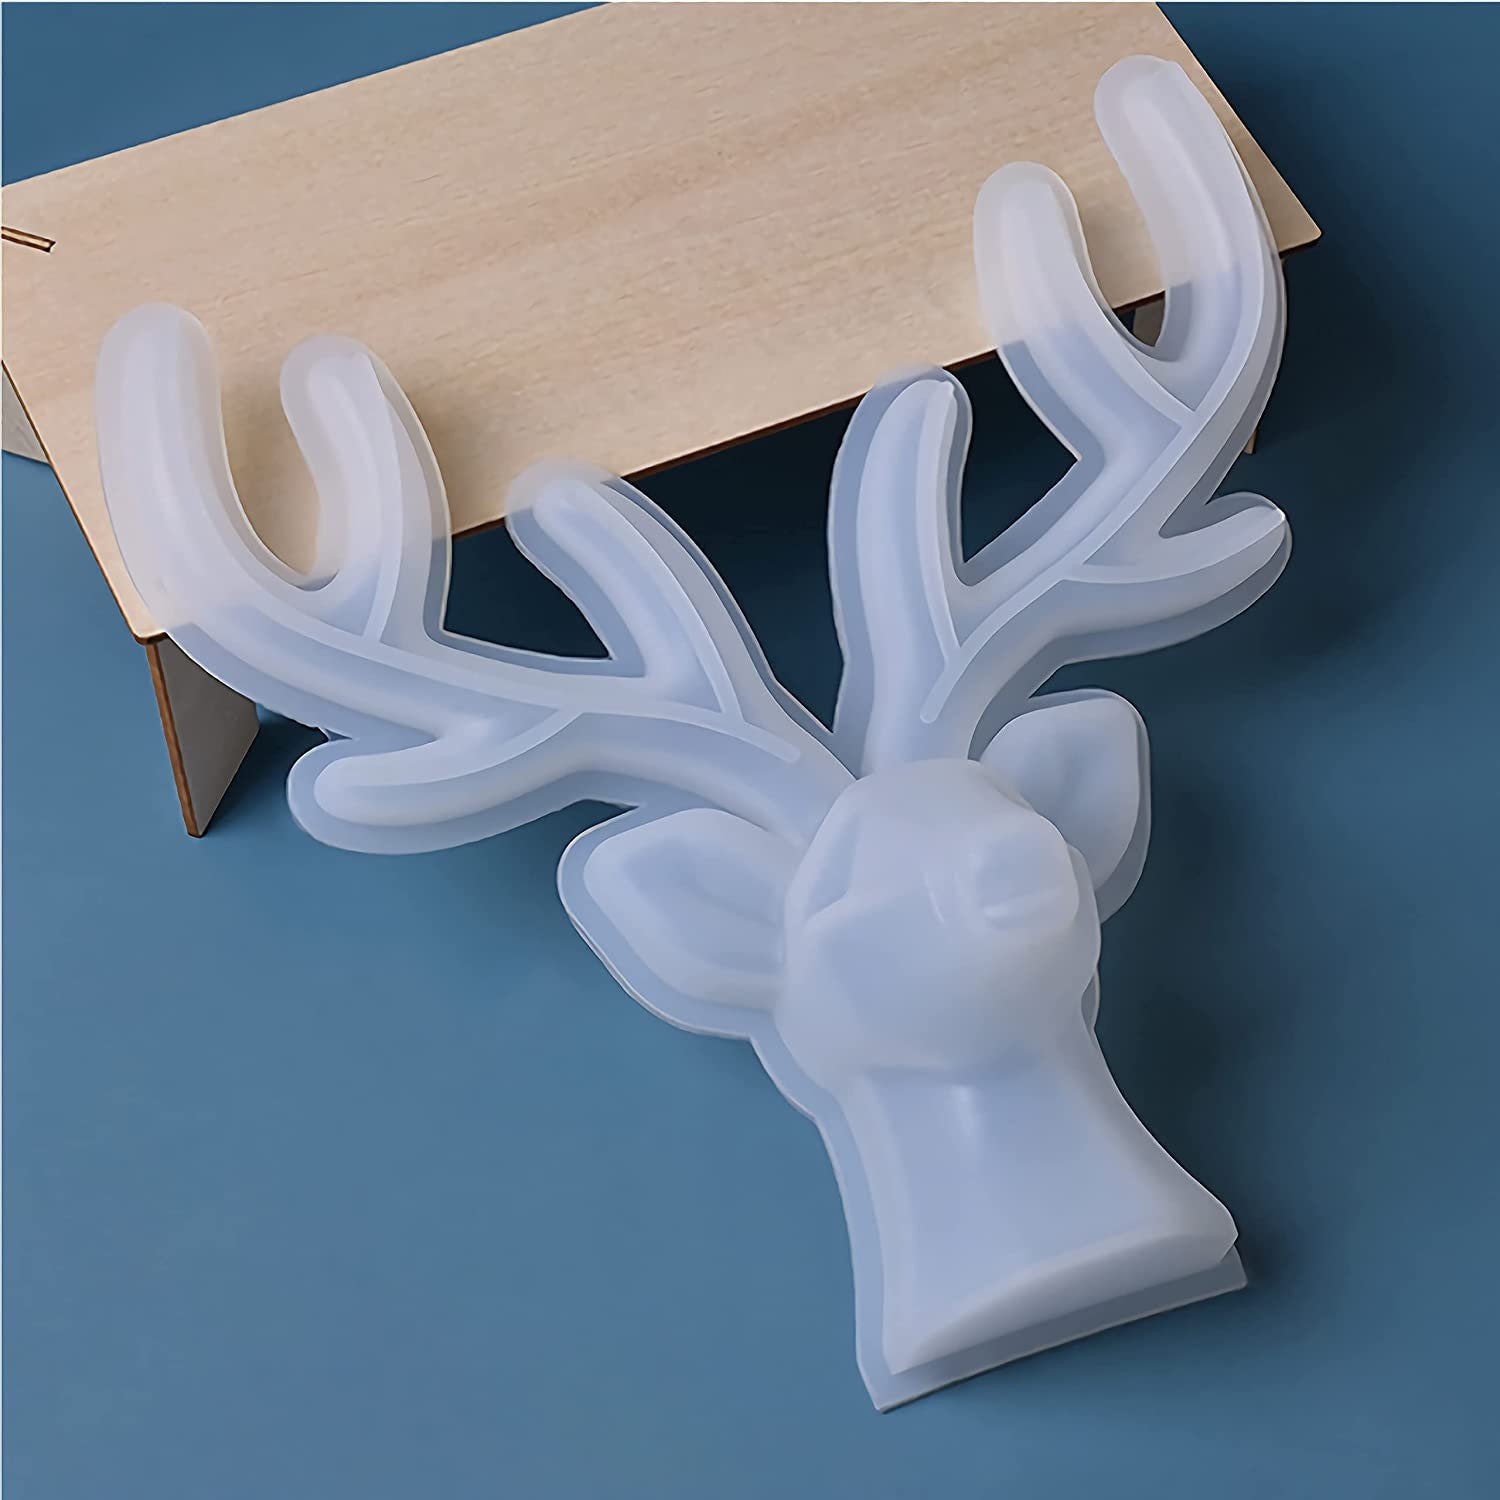 Deer Handicraft Resin Mold Kit with 6 Bowl-Shaped Boxes for